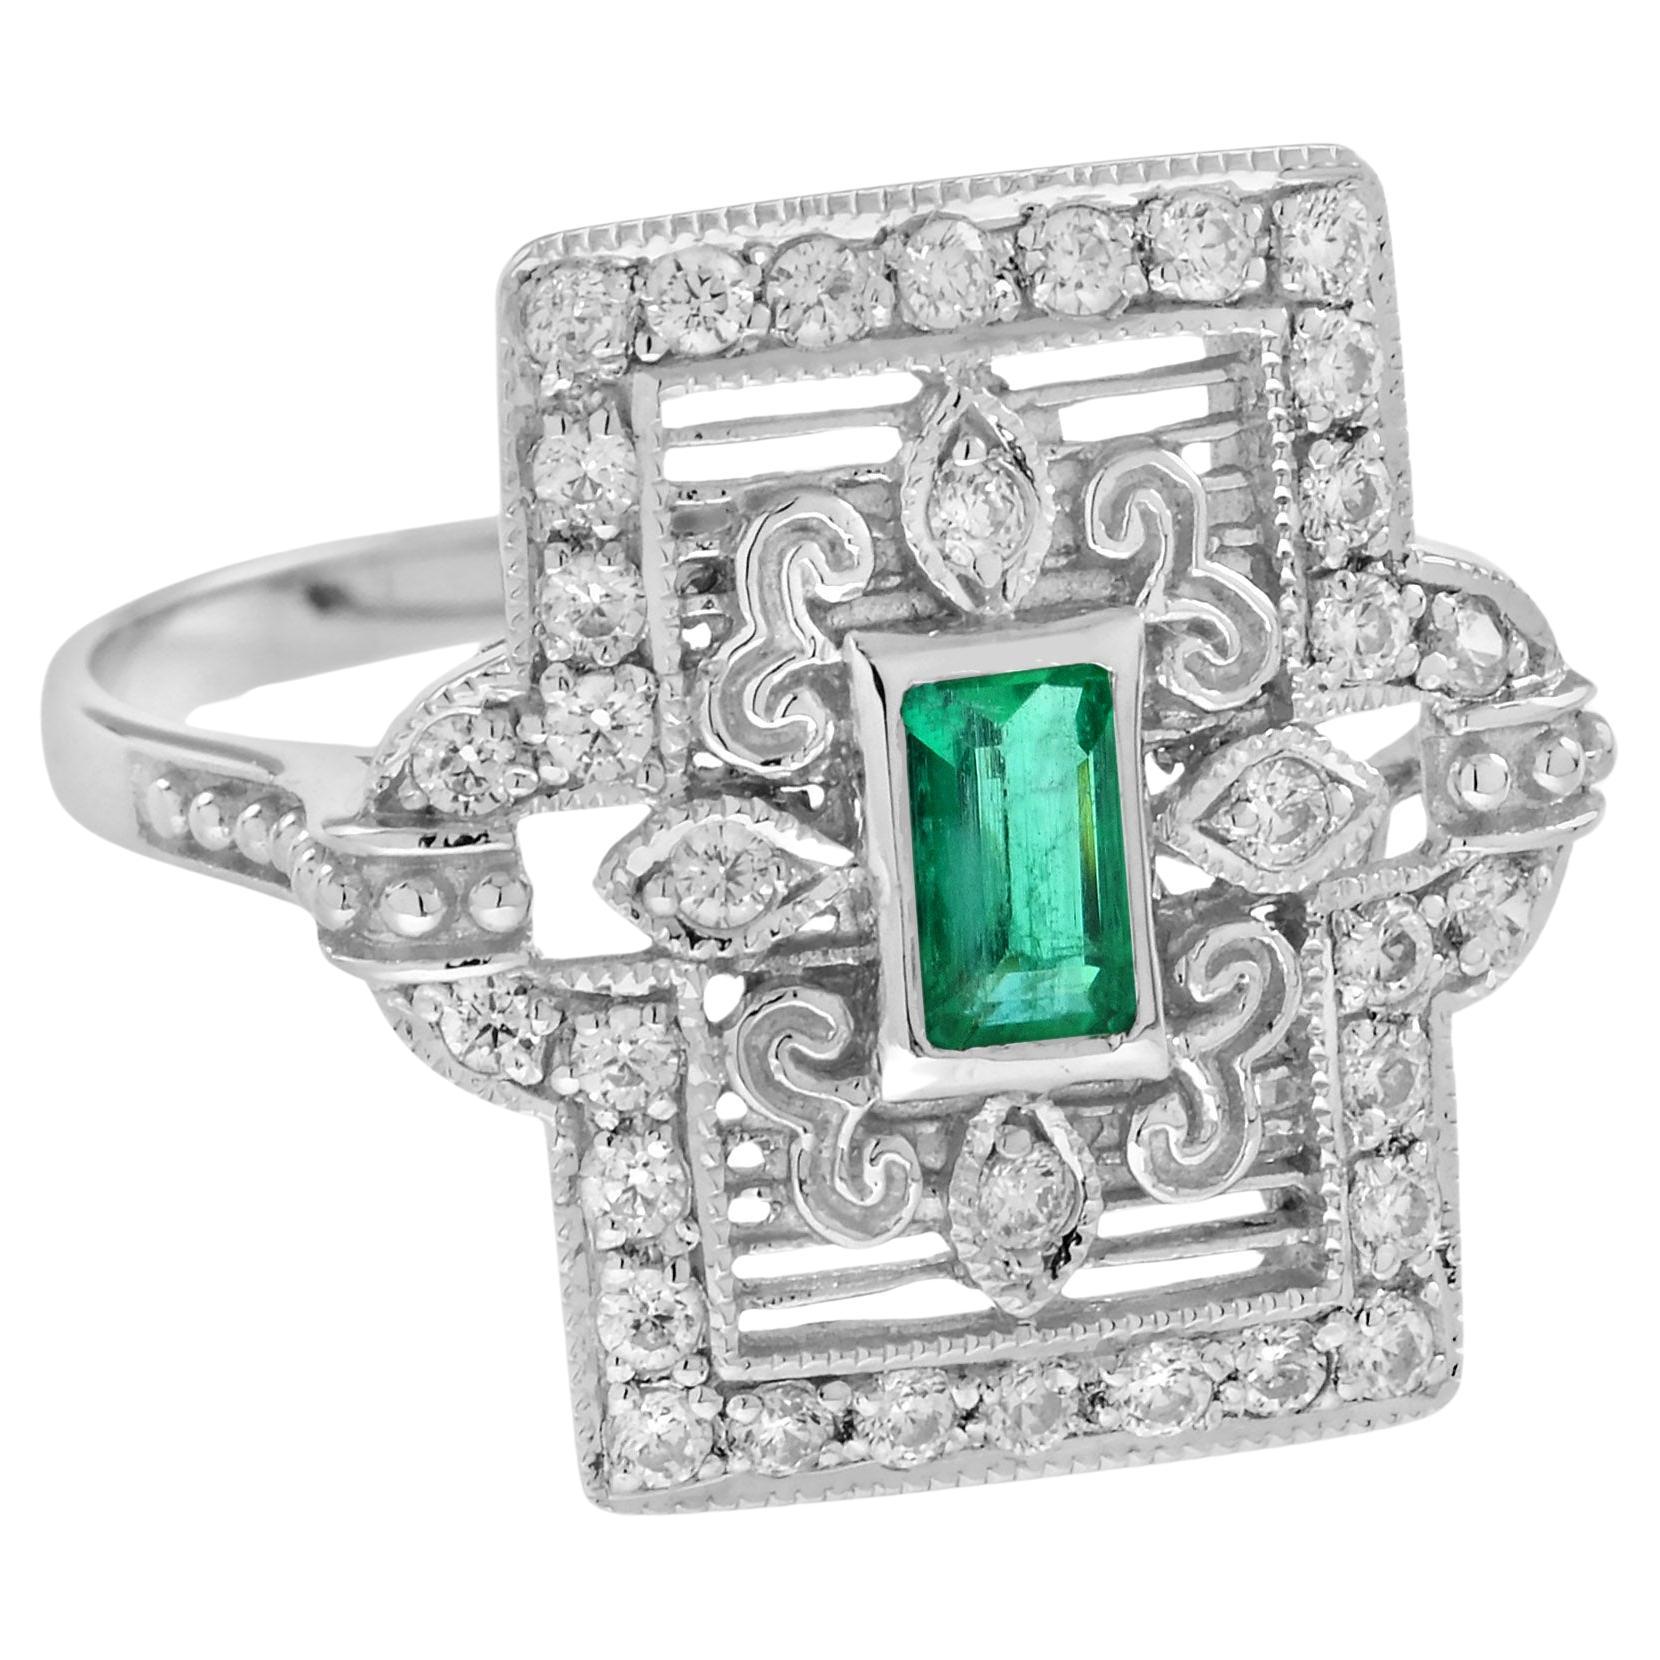 For Sale:  Emerald and Diamond Square Shape Art Deco Style Ring in 9K White Gold